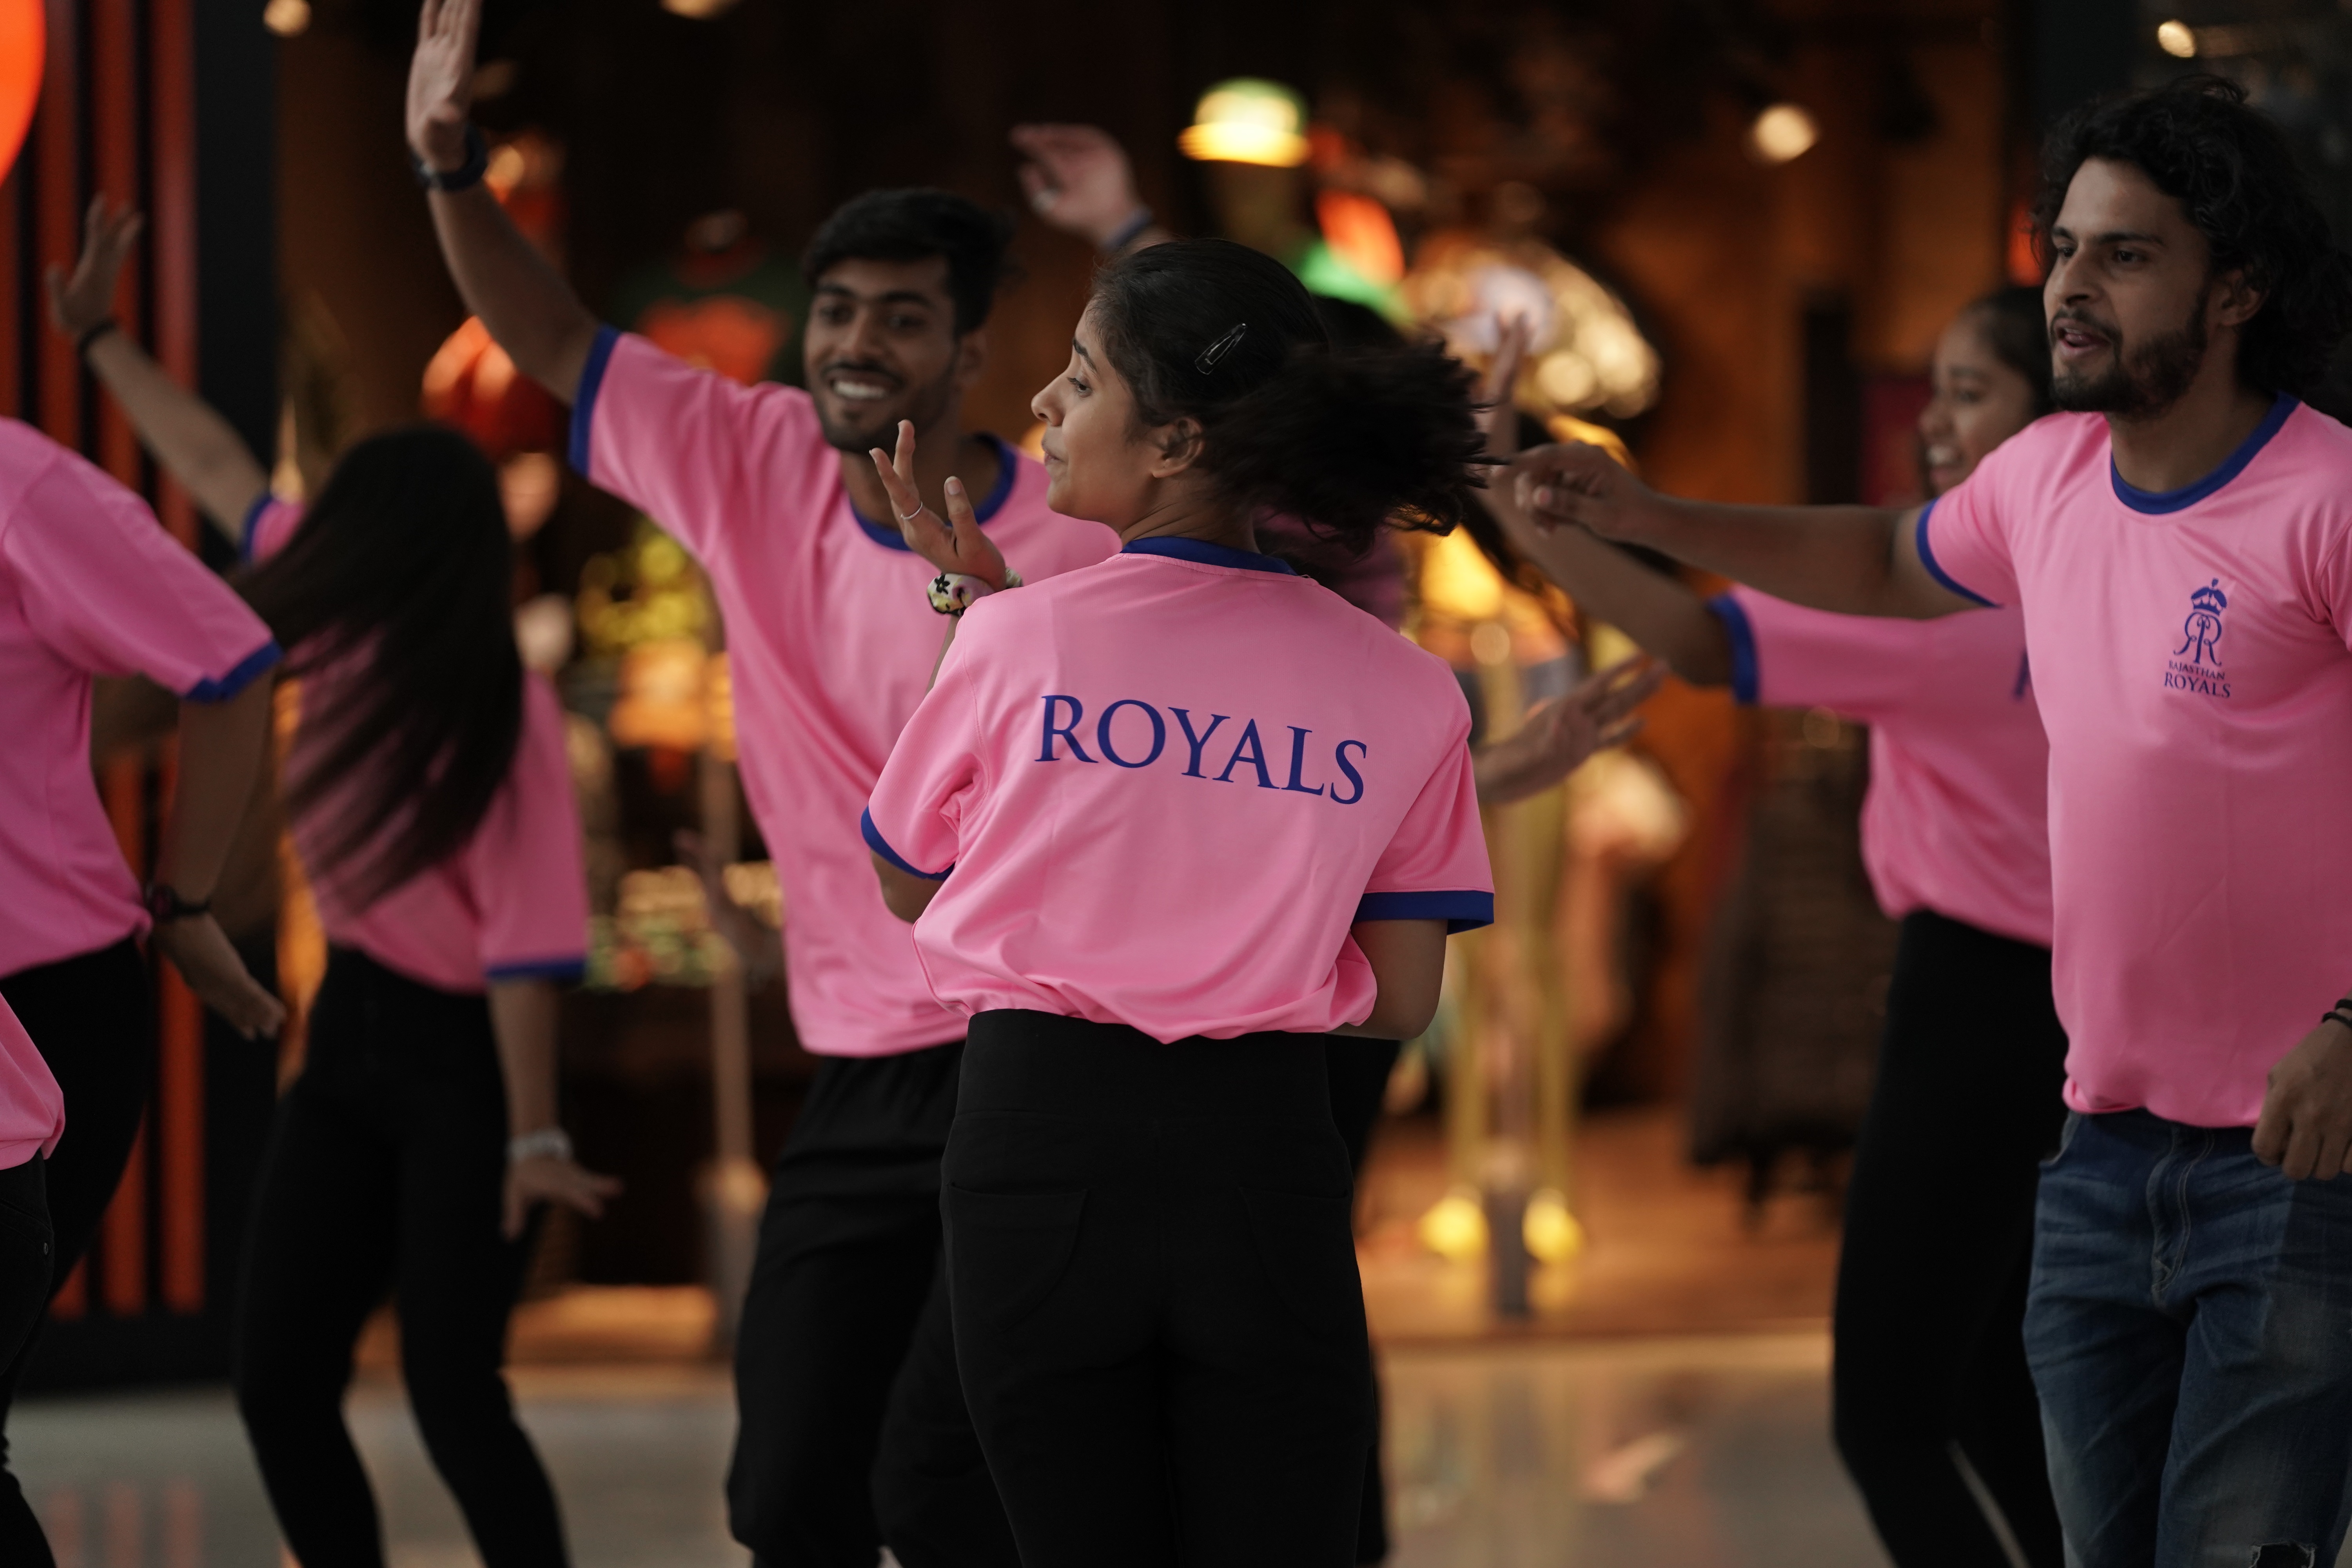 RR vs RCB Live: Dozens of Rajasthan Royals fans dance to RR's official anthem to cheer Sanju Samson & Co ahead of RCB clash - Check pics